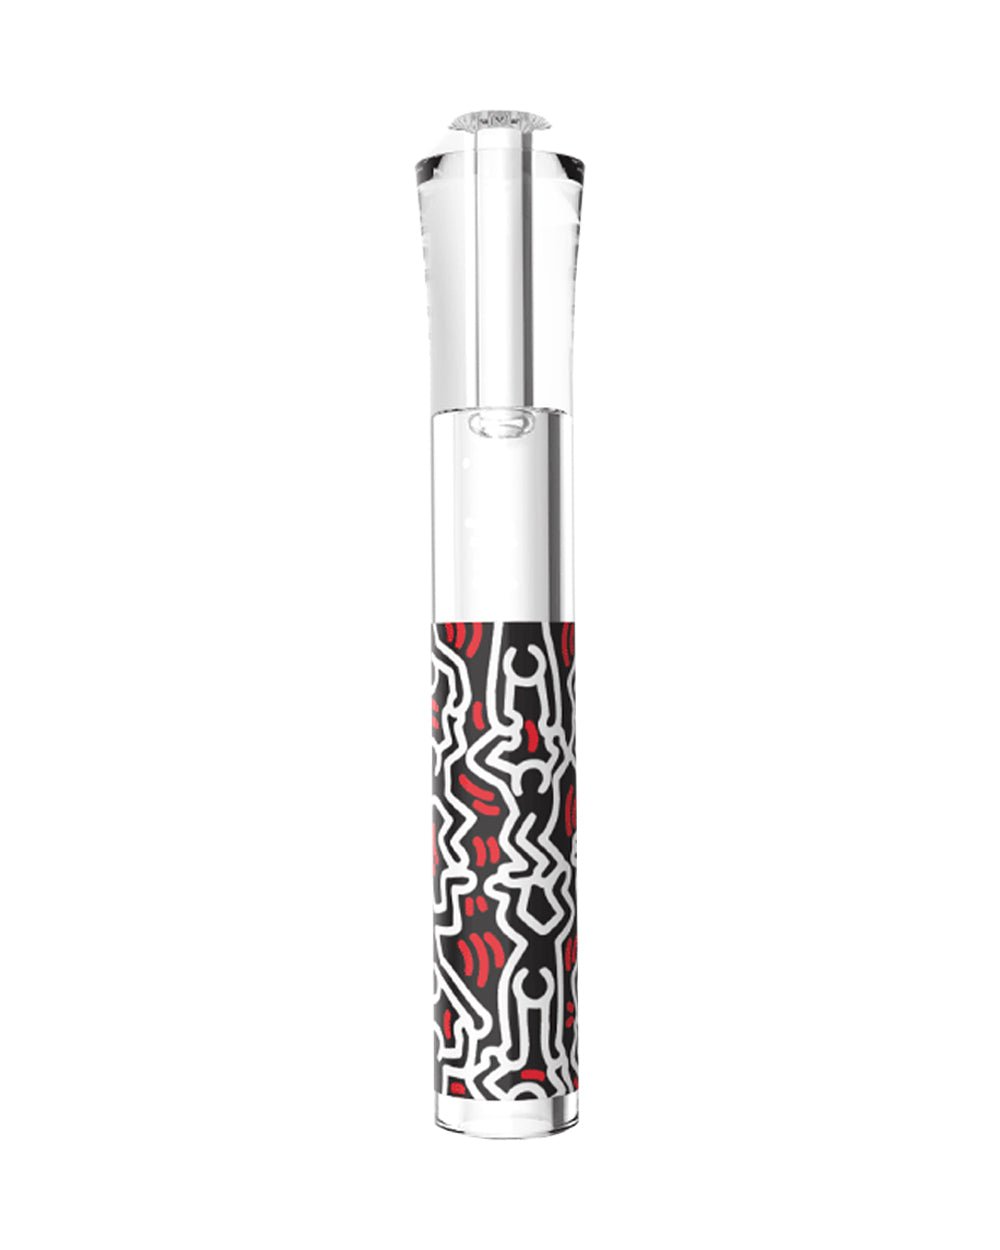 Keith Haring | Glass Taster Chillum Hand Pipe | 3in Long - Glass - Black & White - 5